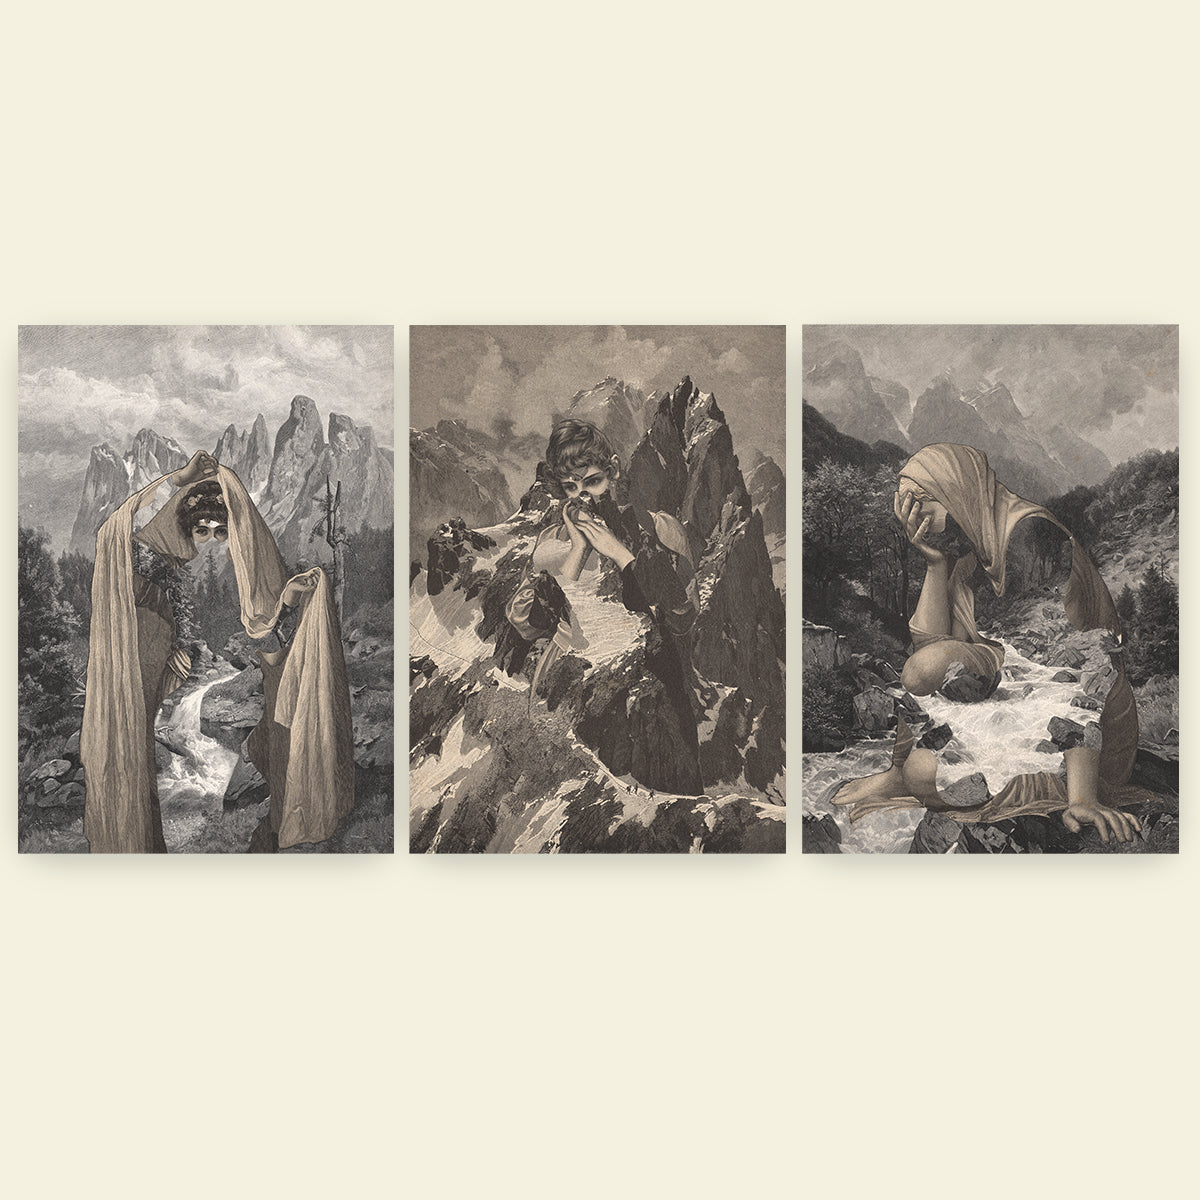 Limited Edition "Mountains of Memories" Art Print Series